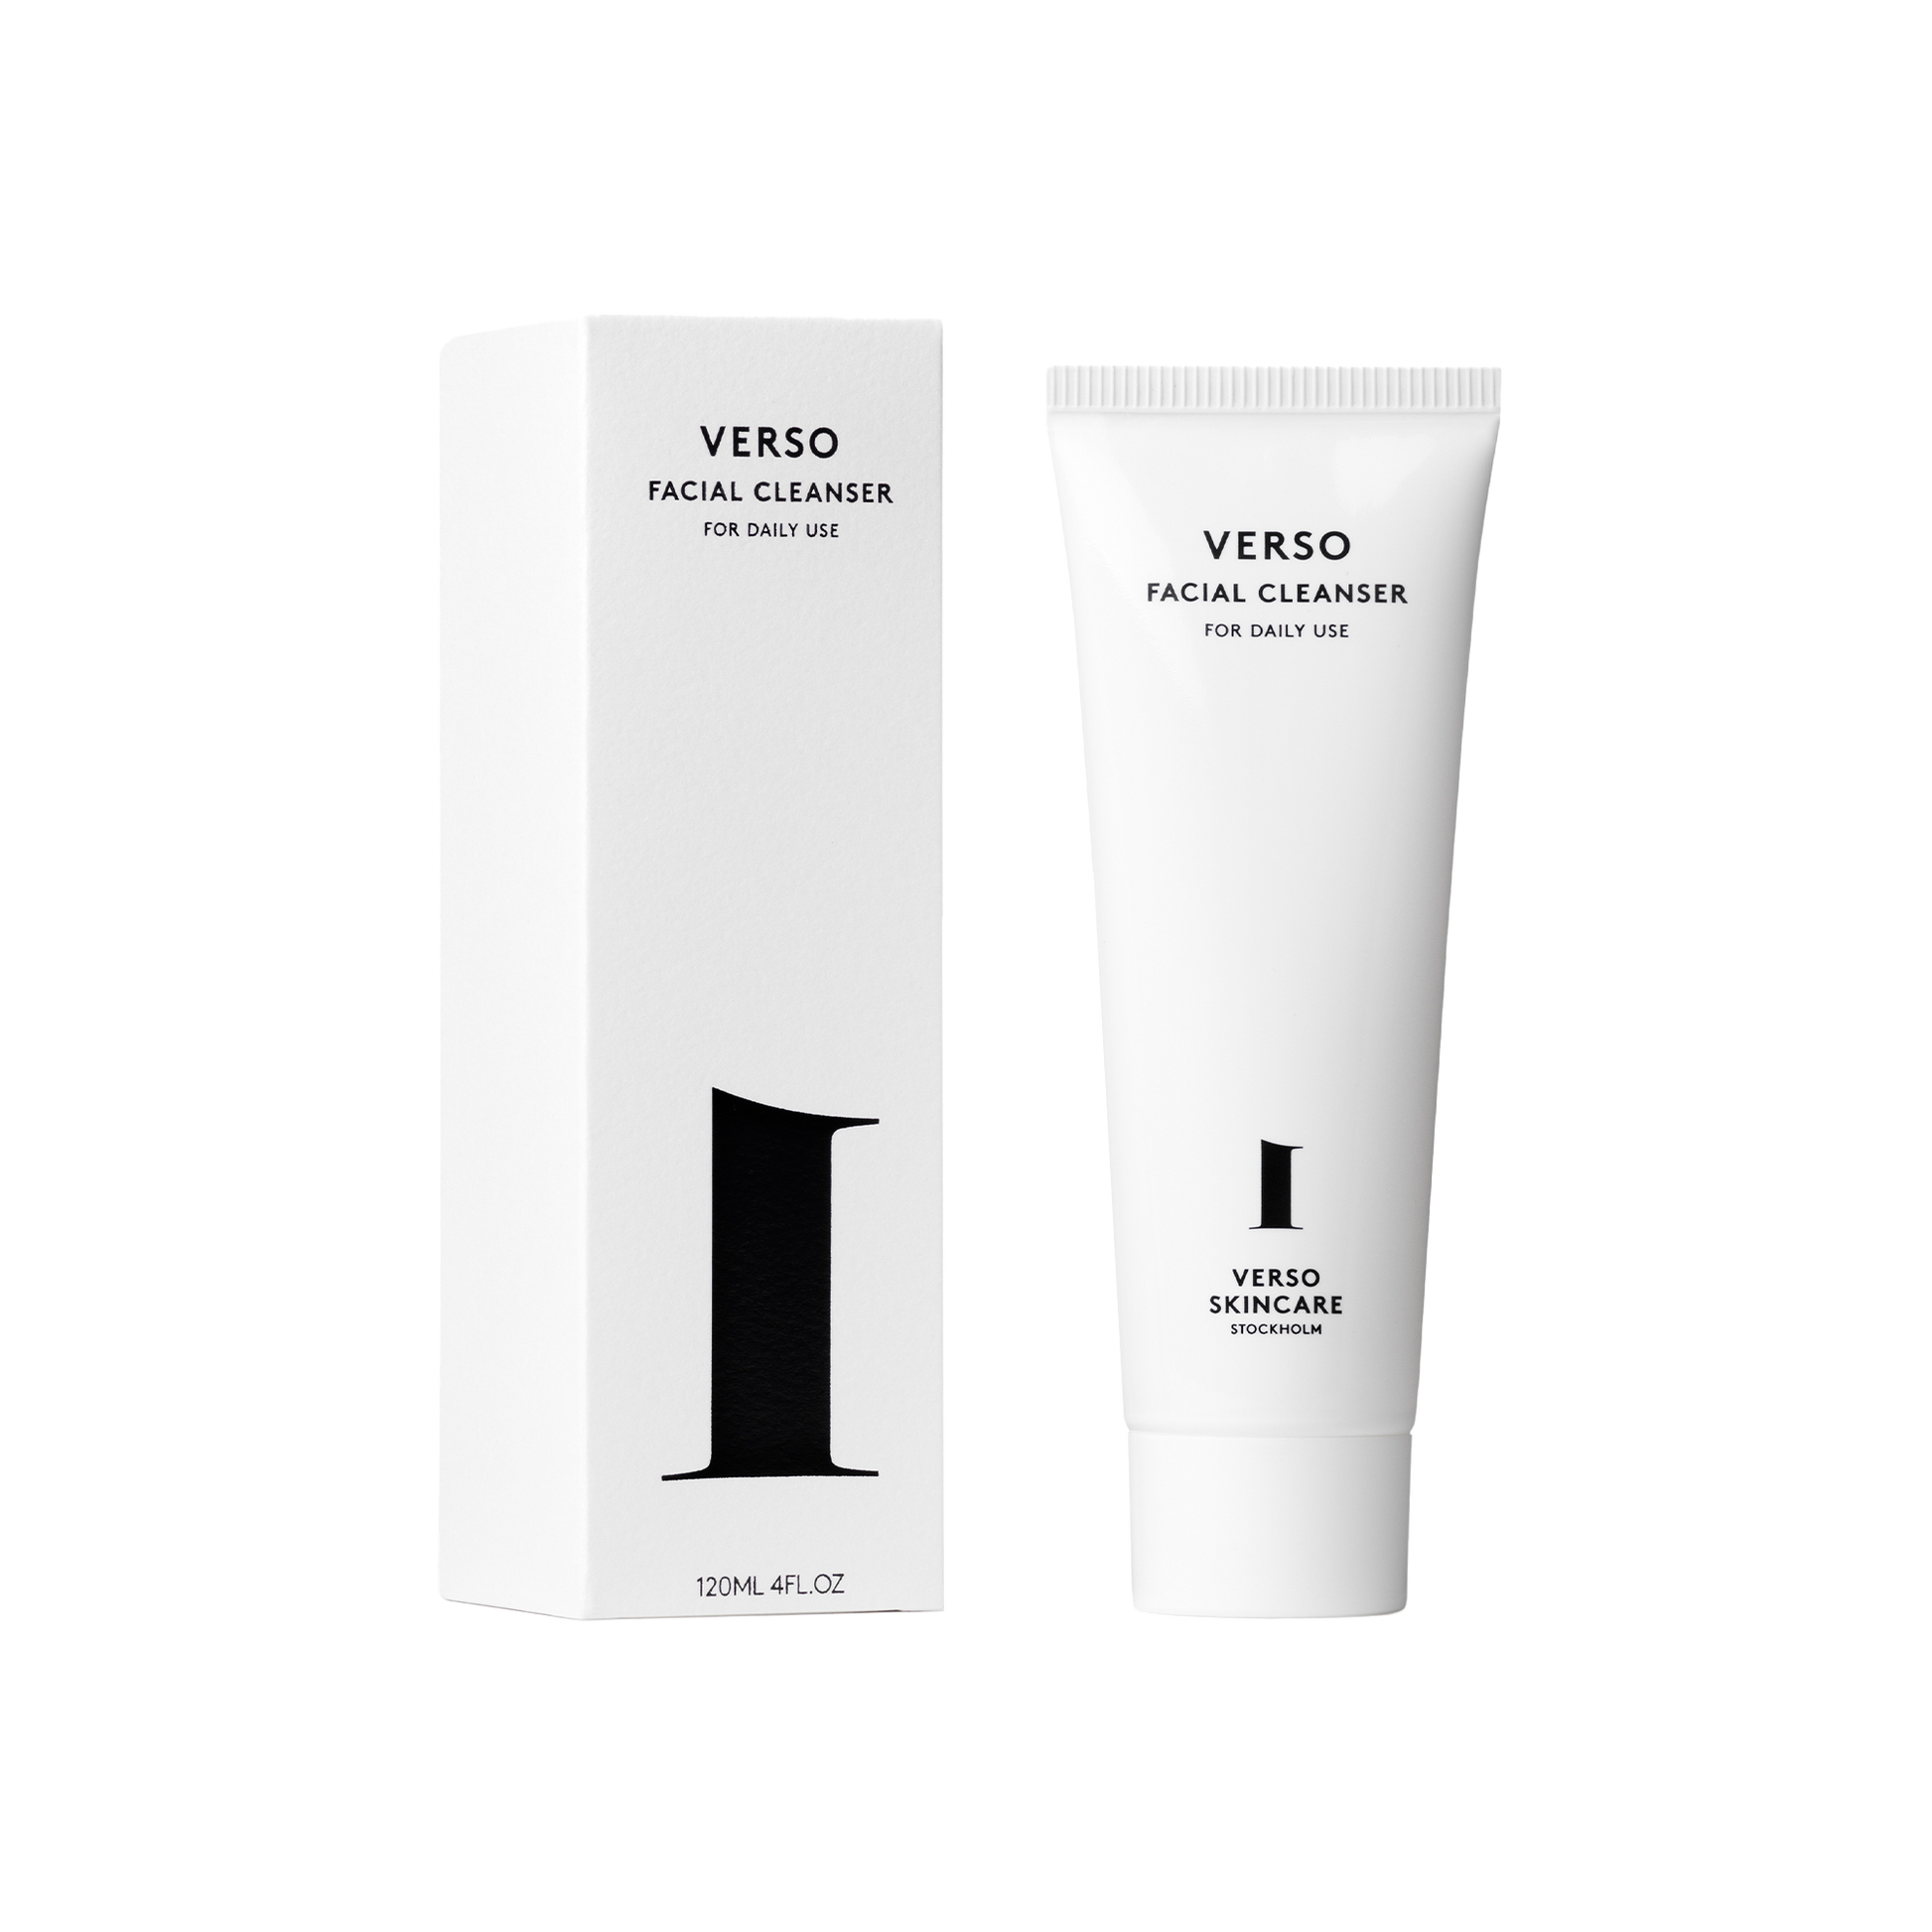 Verso Facial Cleanser: Gently cleanses the skin leaving it balanced and ready for the next step of your skincare routine. Transforms from a creamy texture to a light lotion with a slight lather when mixed with water. This formulation contains enzymes, a mild exfoliator, to cleanse the skin effectively.